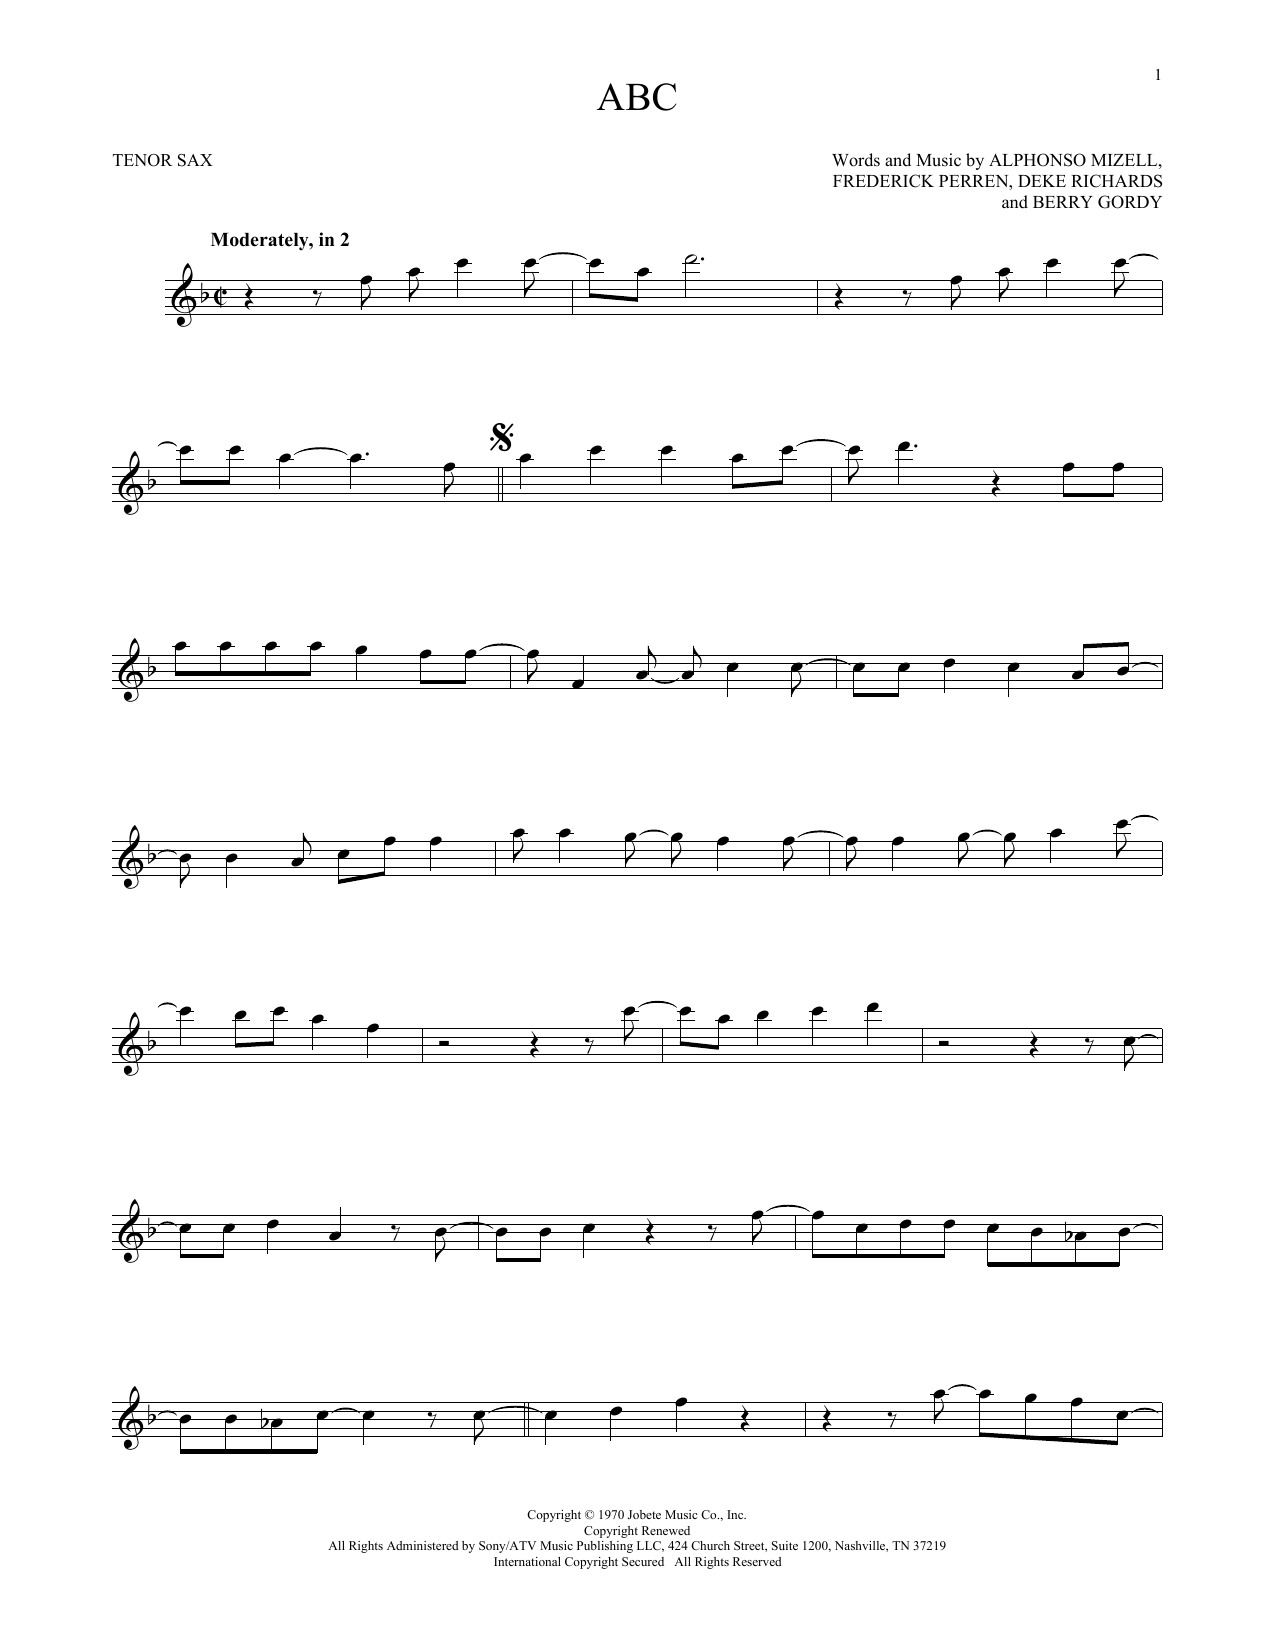 Download The Jackson 5 ABC Sheet Music